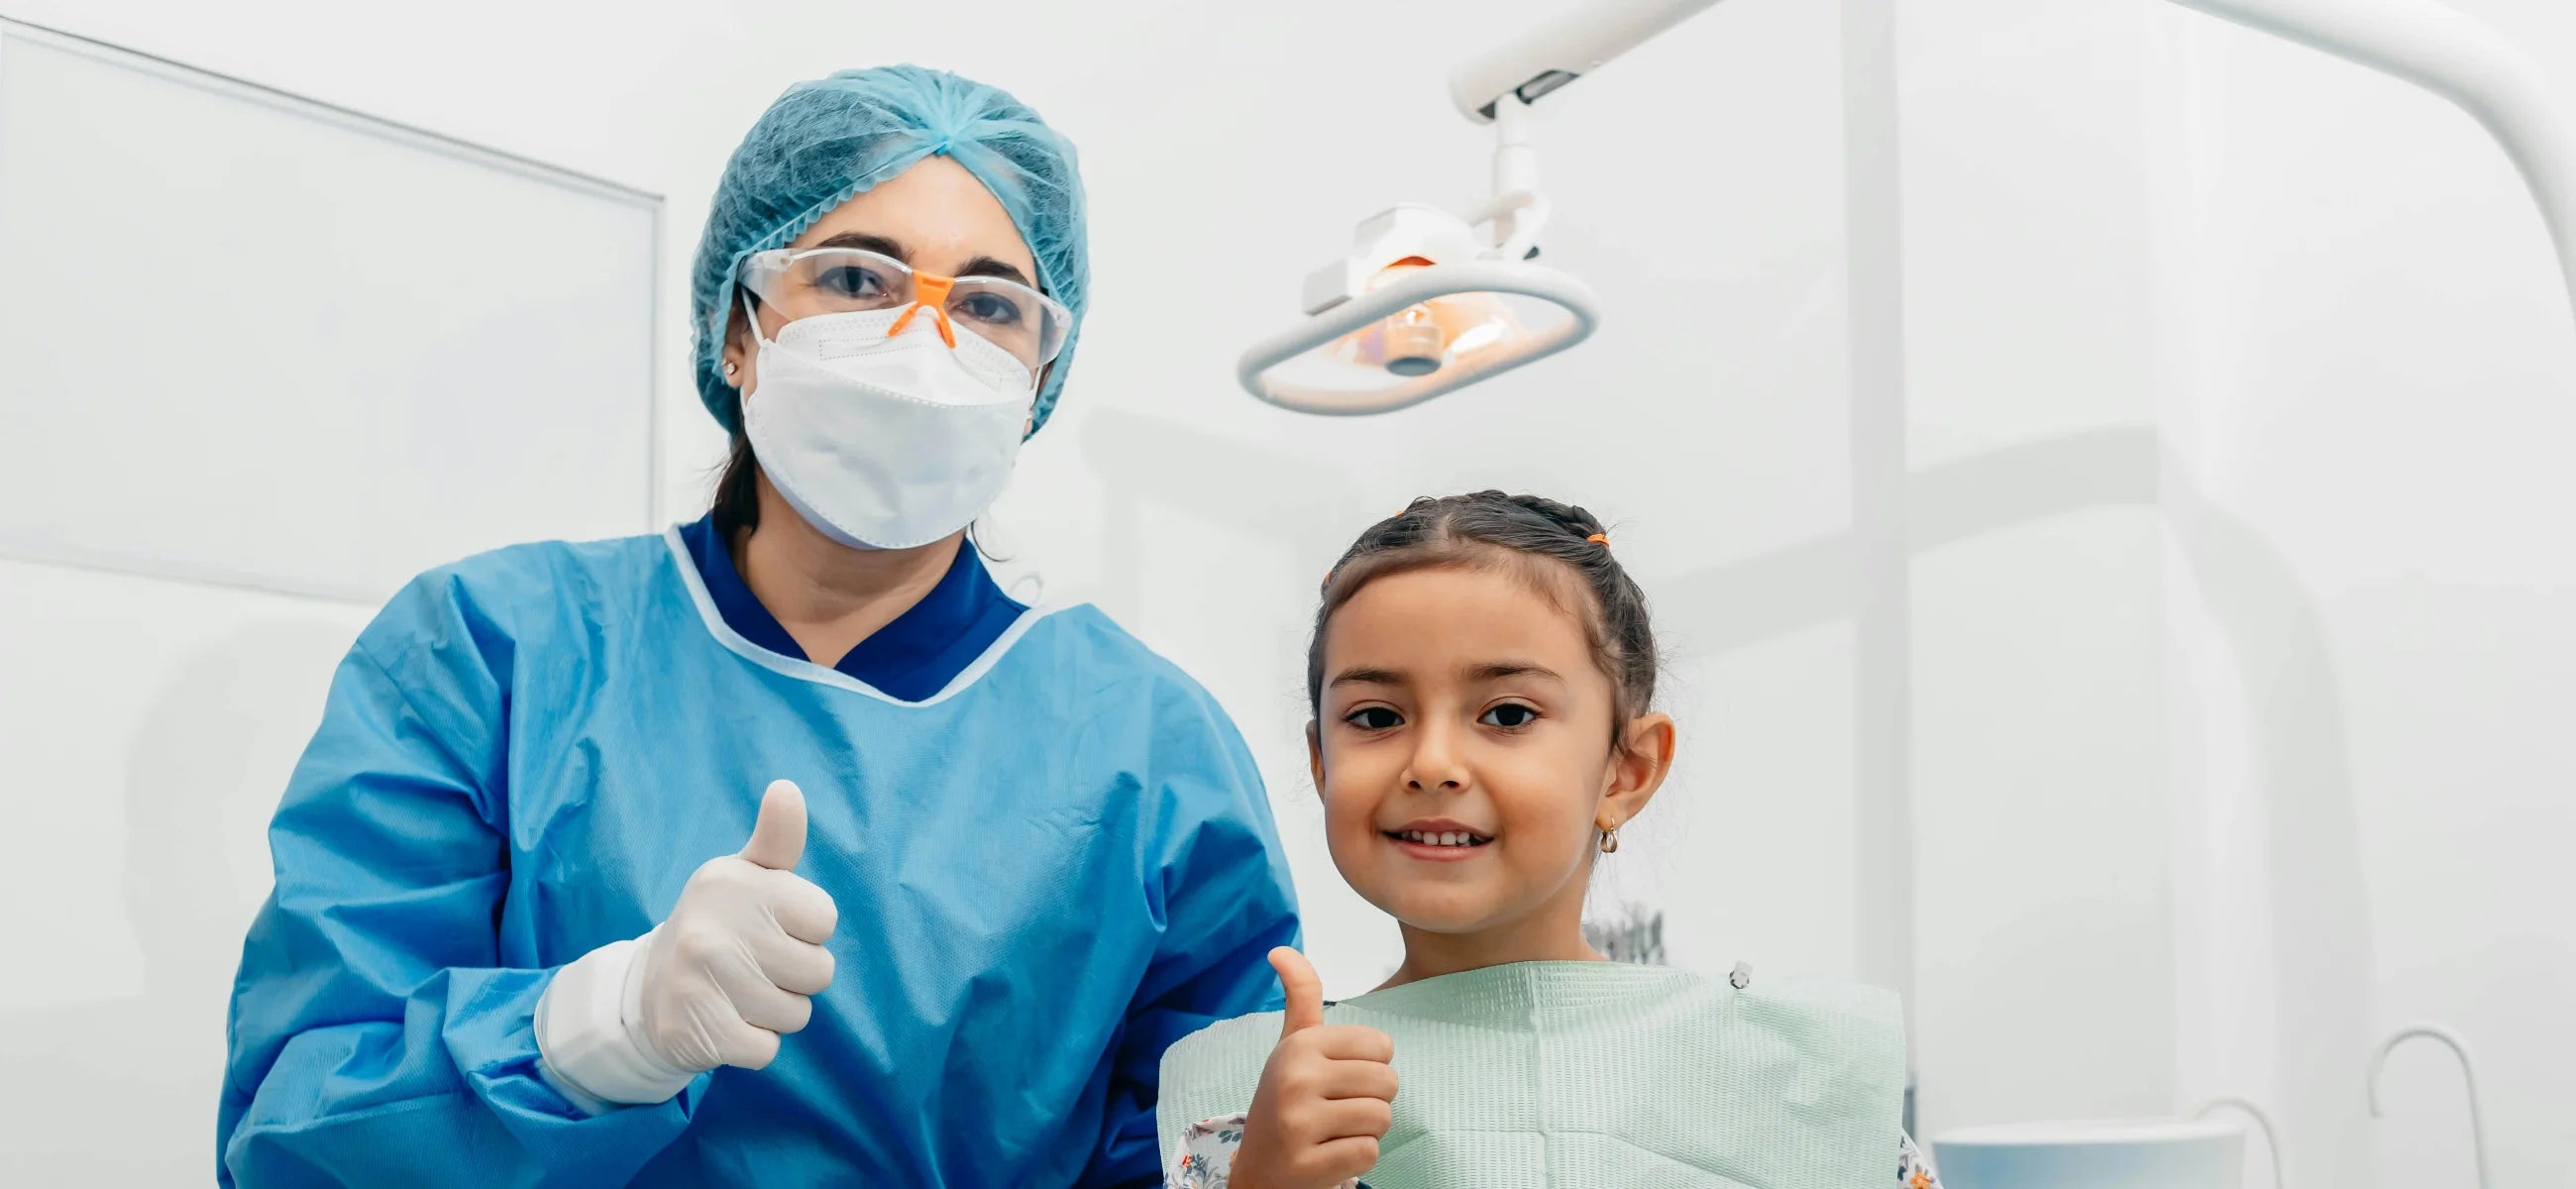 Pain-free or pain-ful? How painful is dental implant surgery?